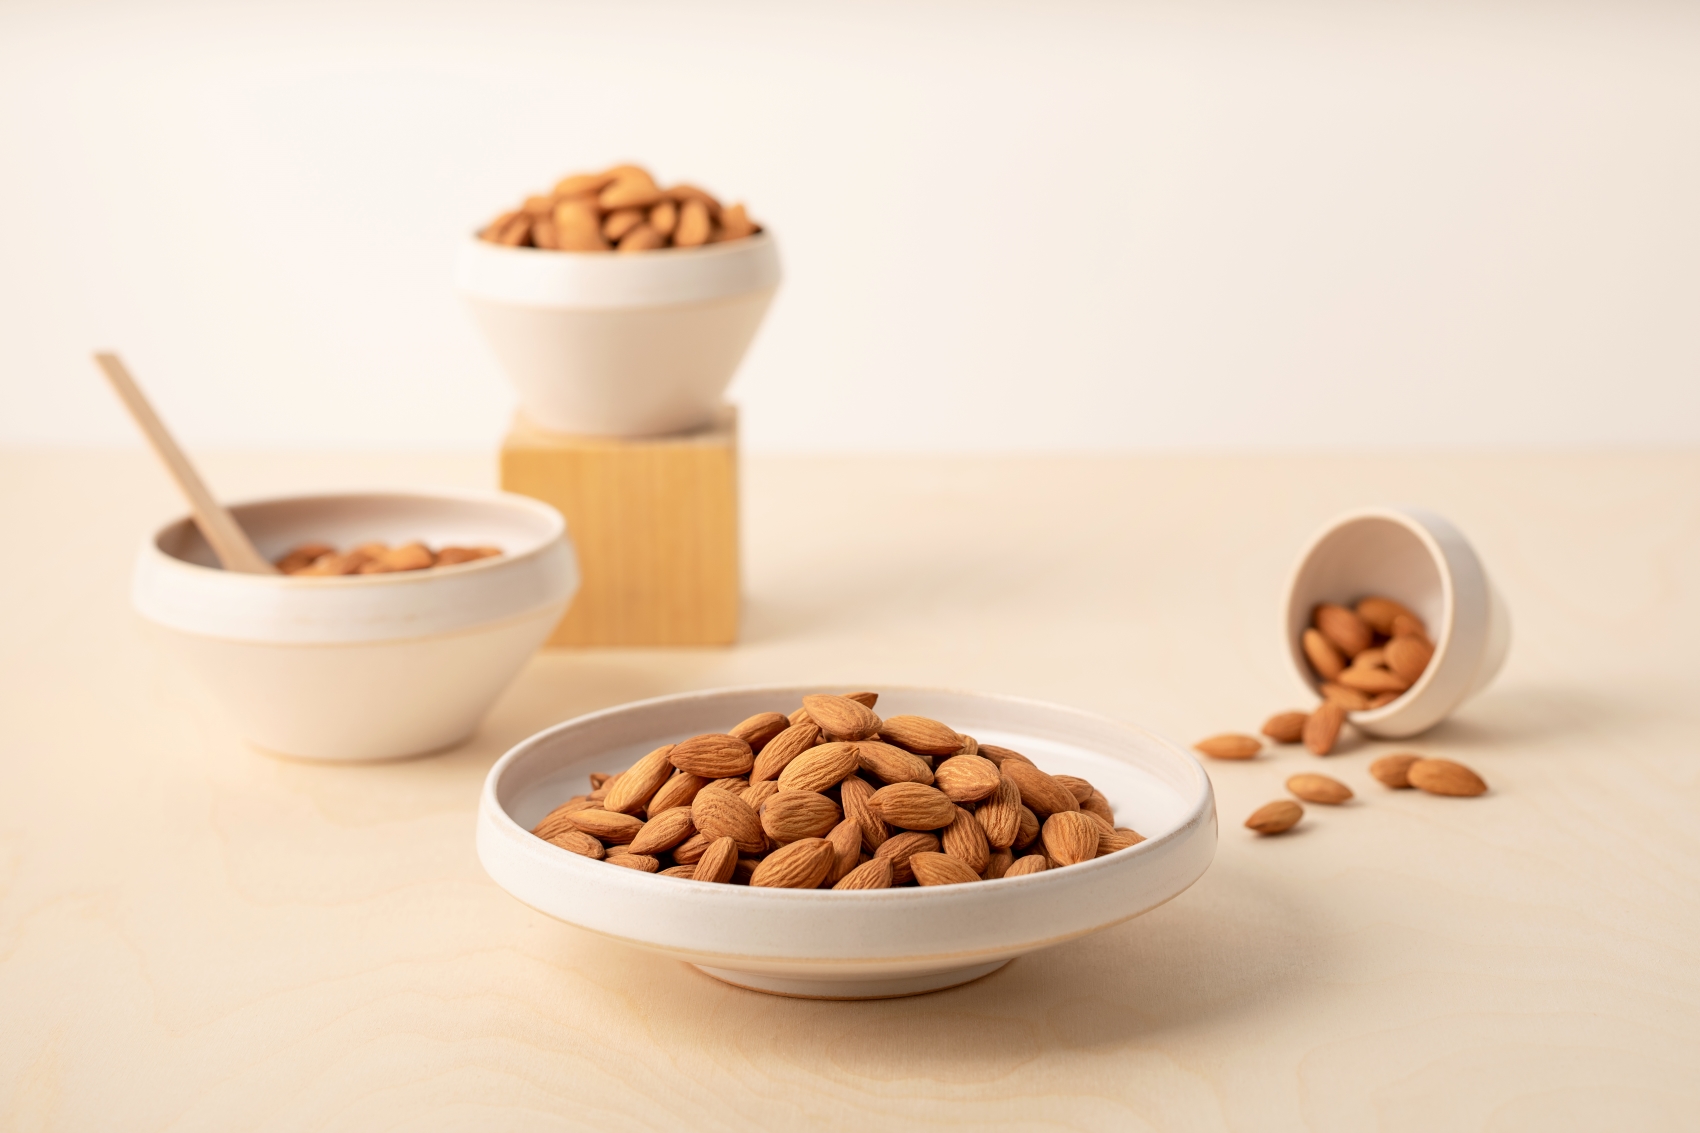 almonds displayed on plates and bowls